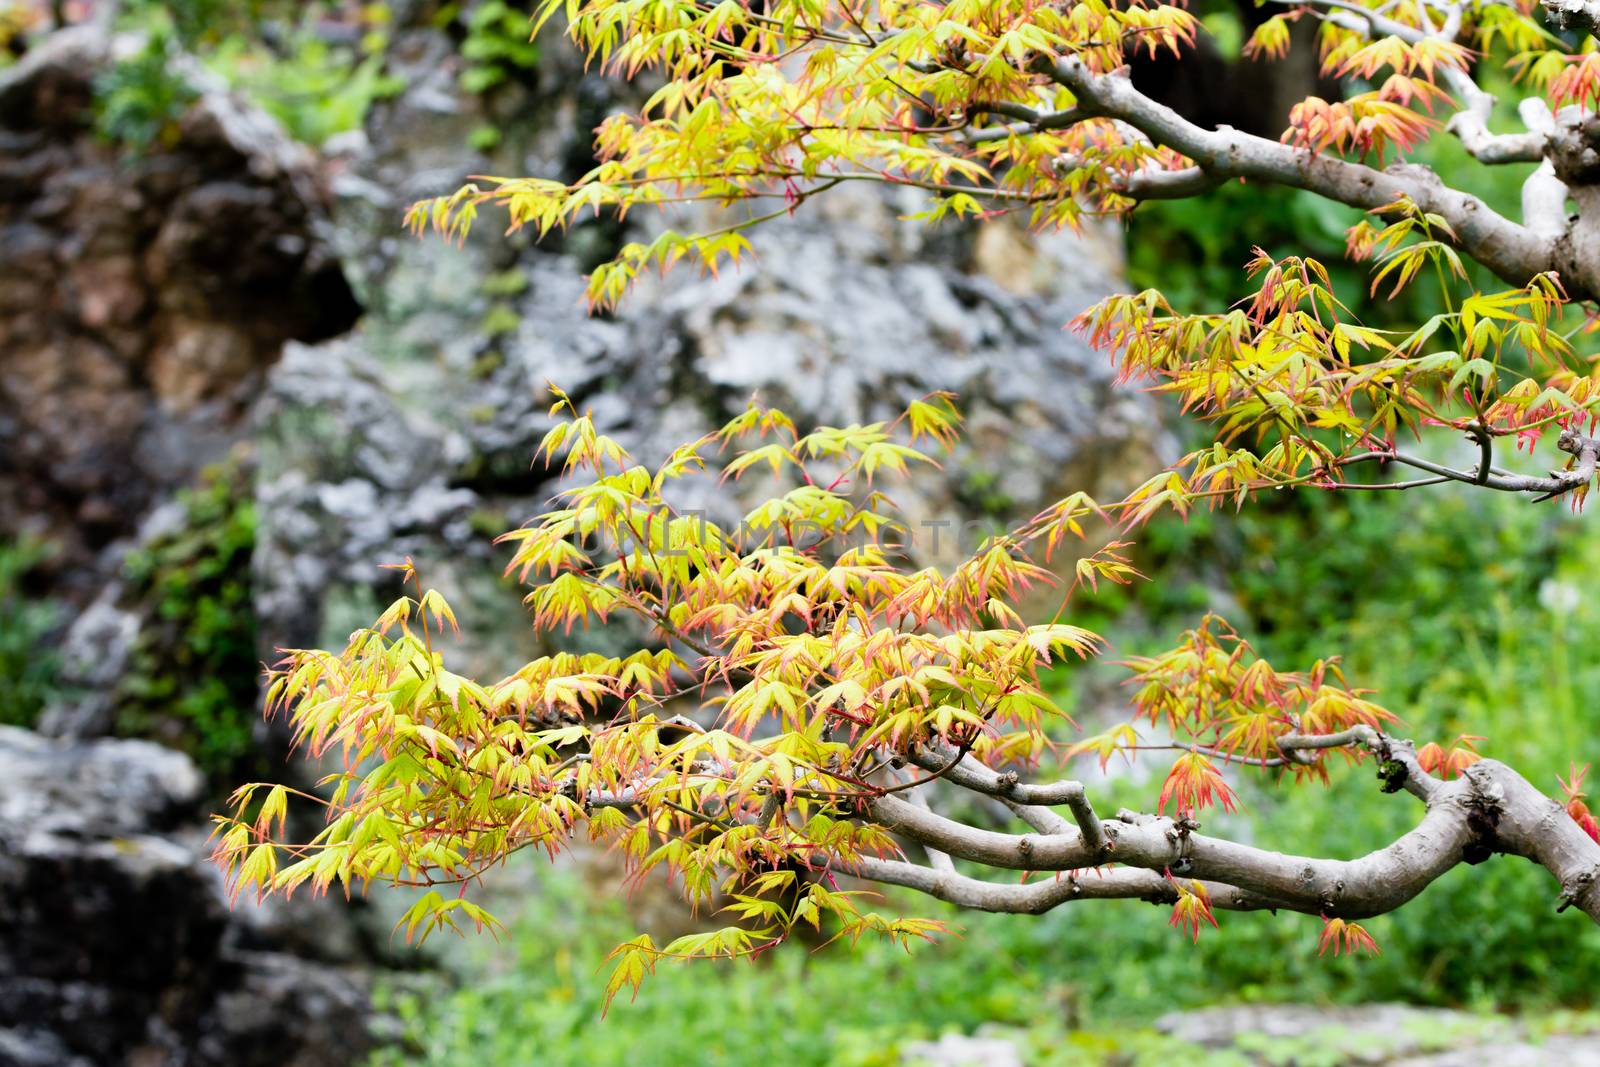 A branch of a Japanese maple tree in a Japanese garden in early spring.